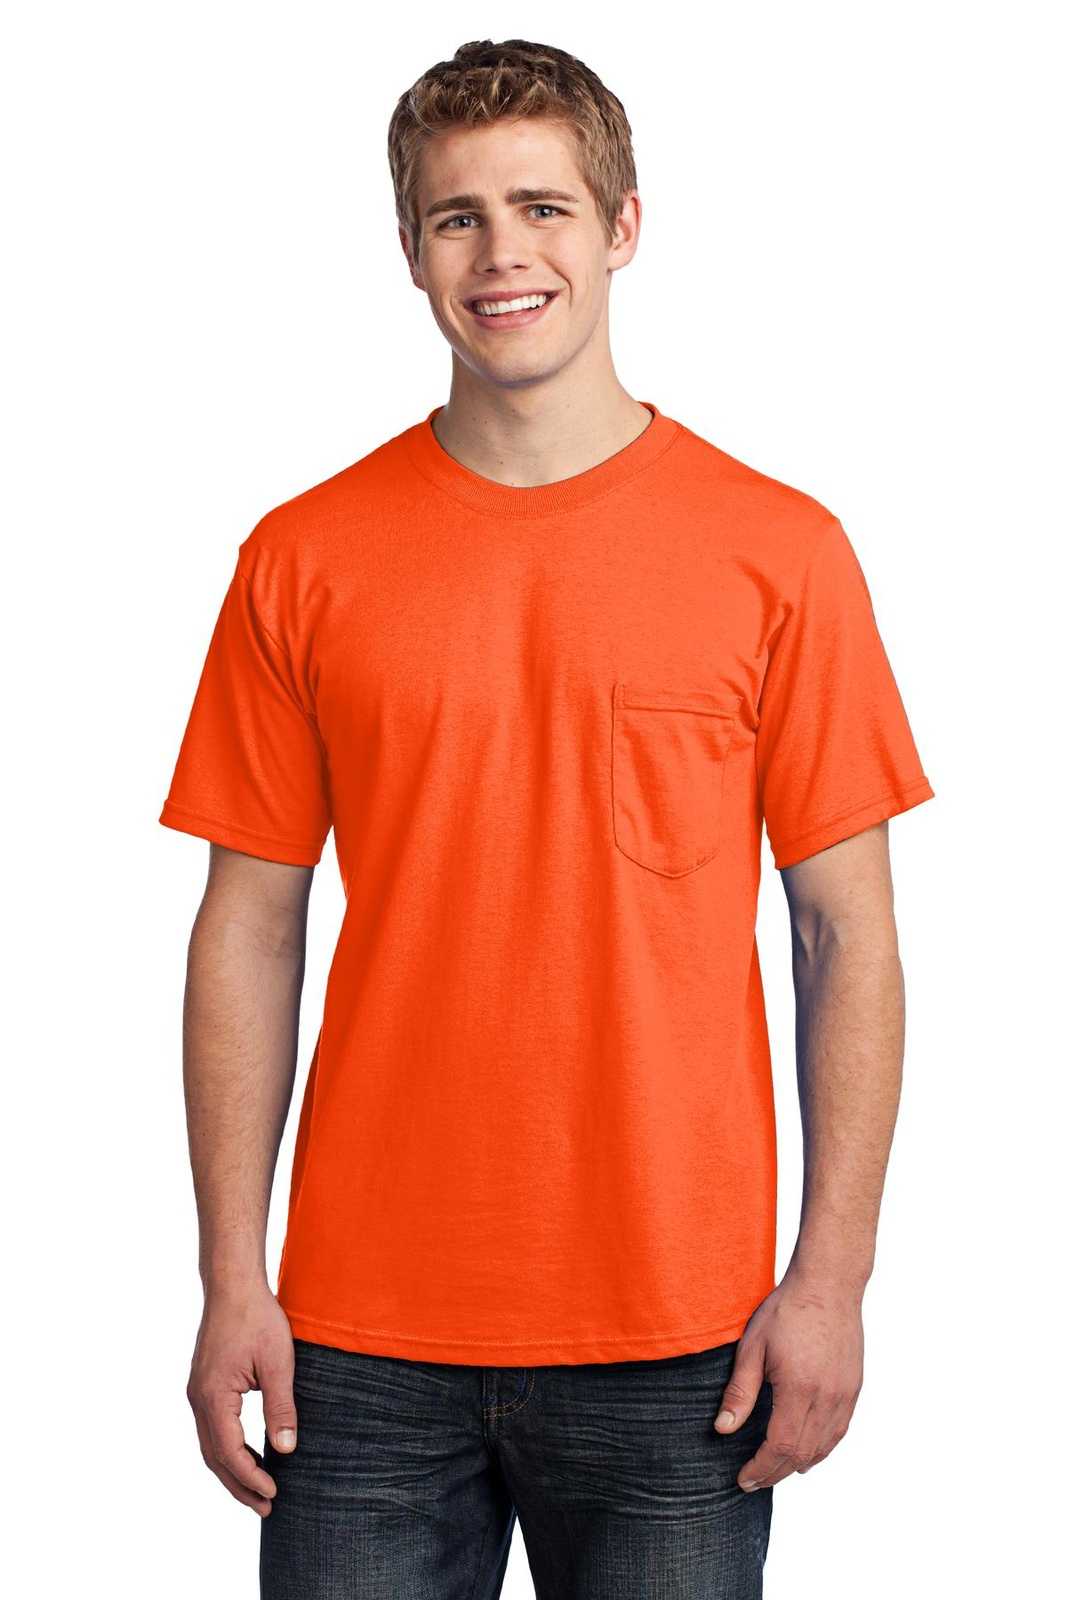 Port &amp; Company USA100P All-American Pocket Tee - Safety Orange - HIT a Double - 1